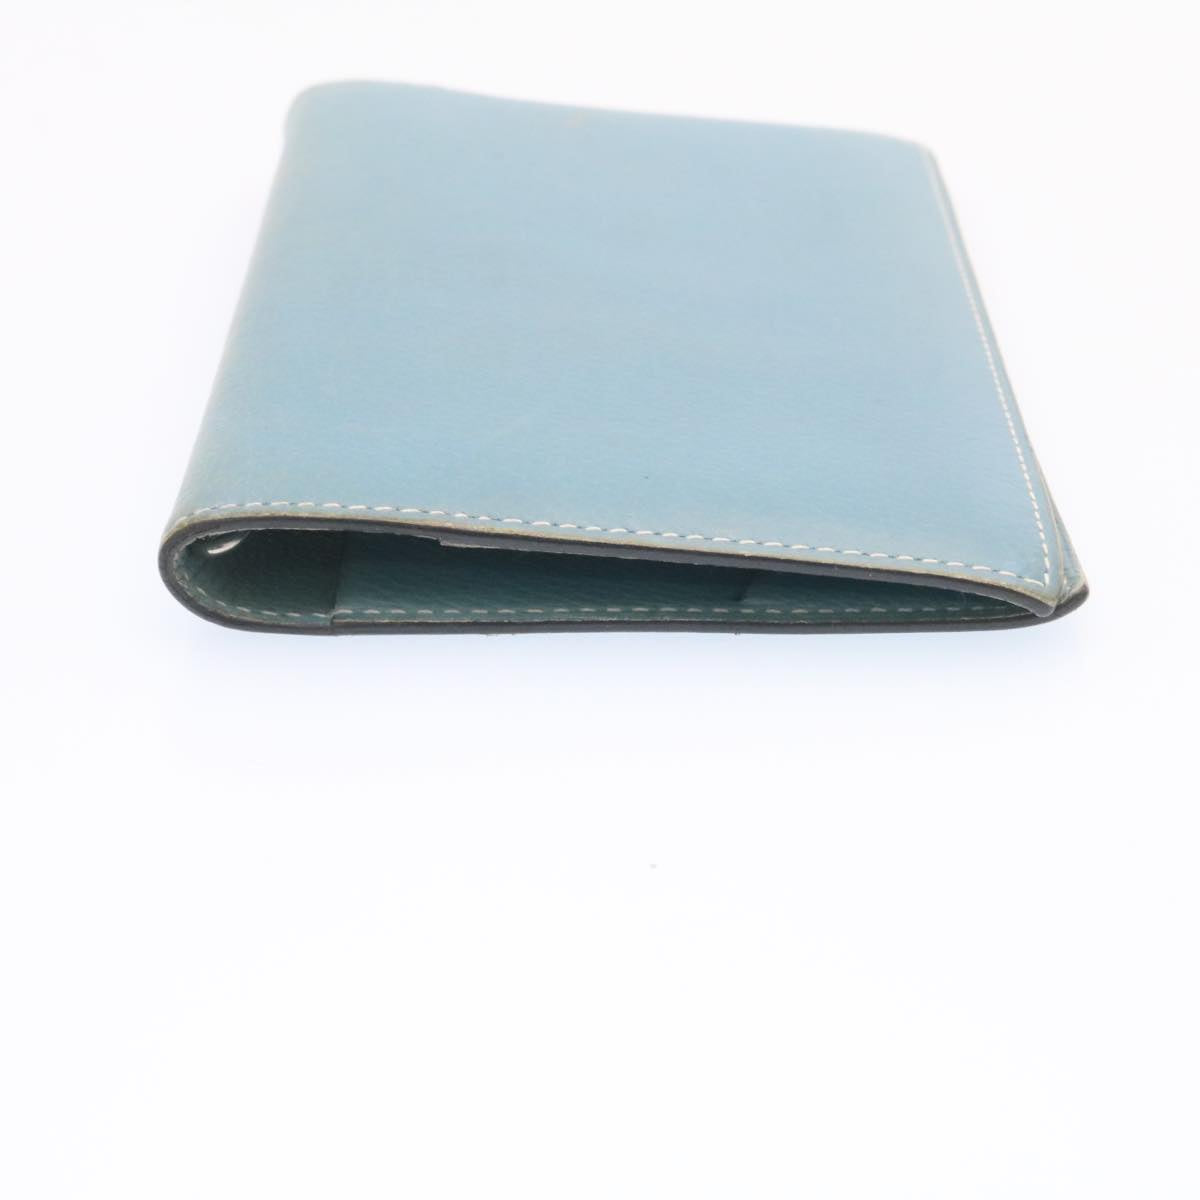 HERMES Notebook Cover Leather Light Blue Auth yk2852